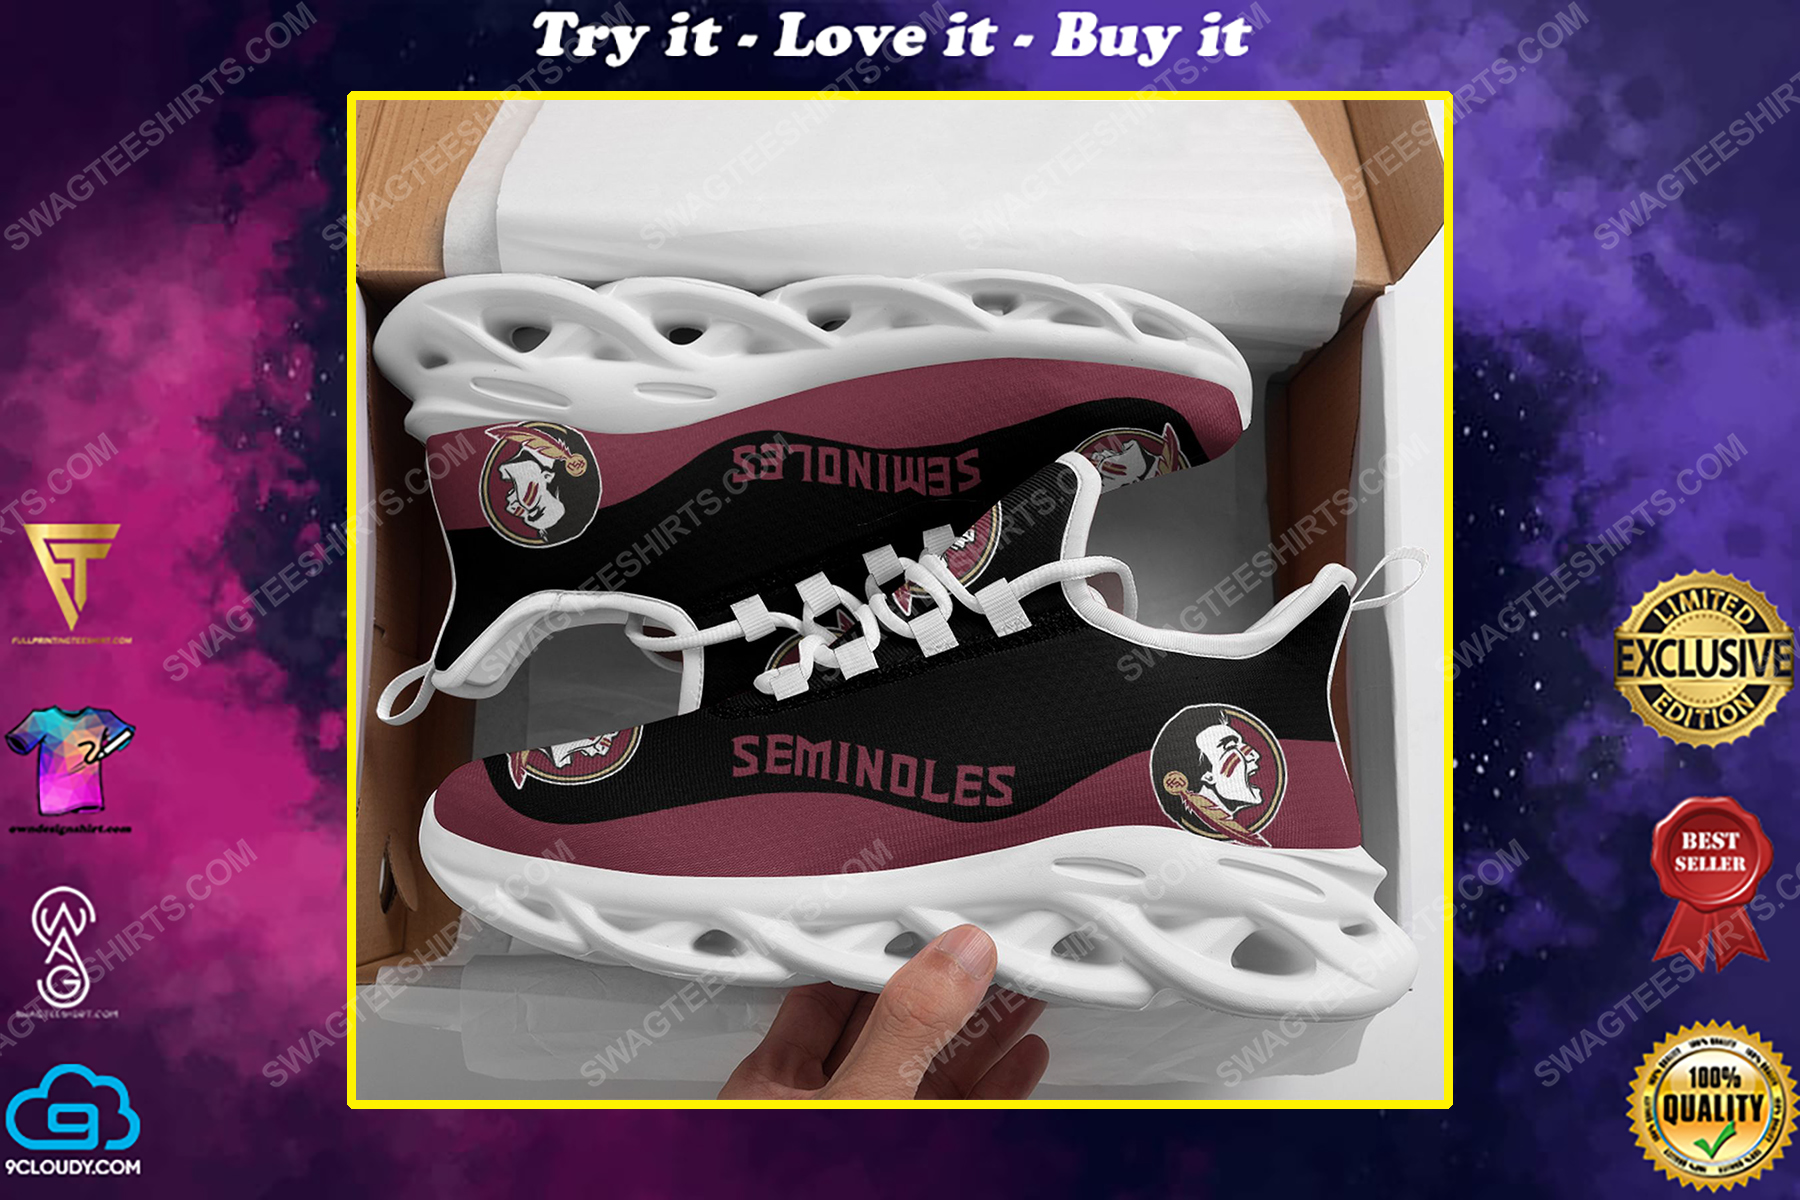 The florida state seminoles football team max soul shoes